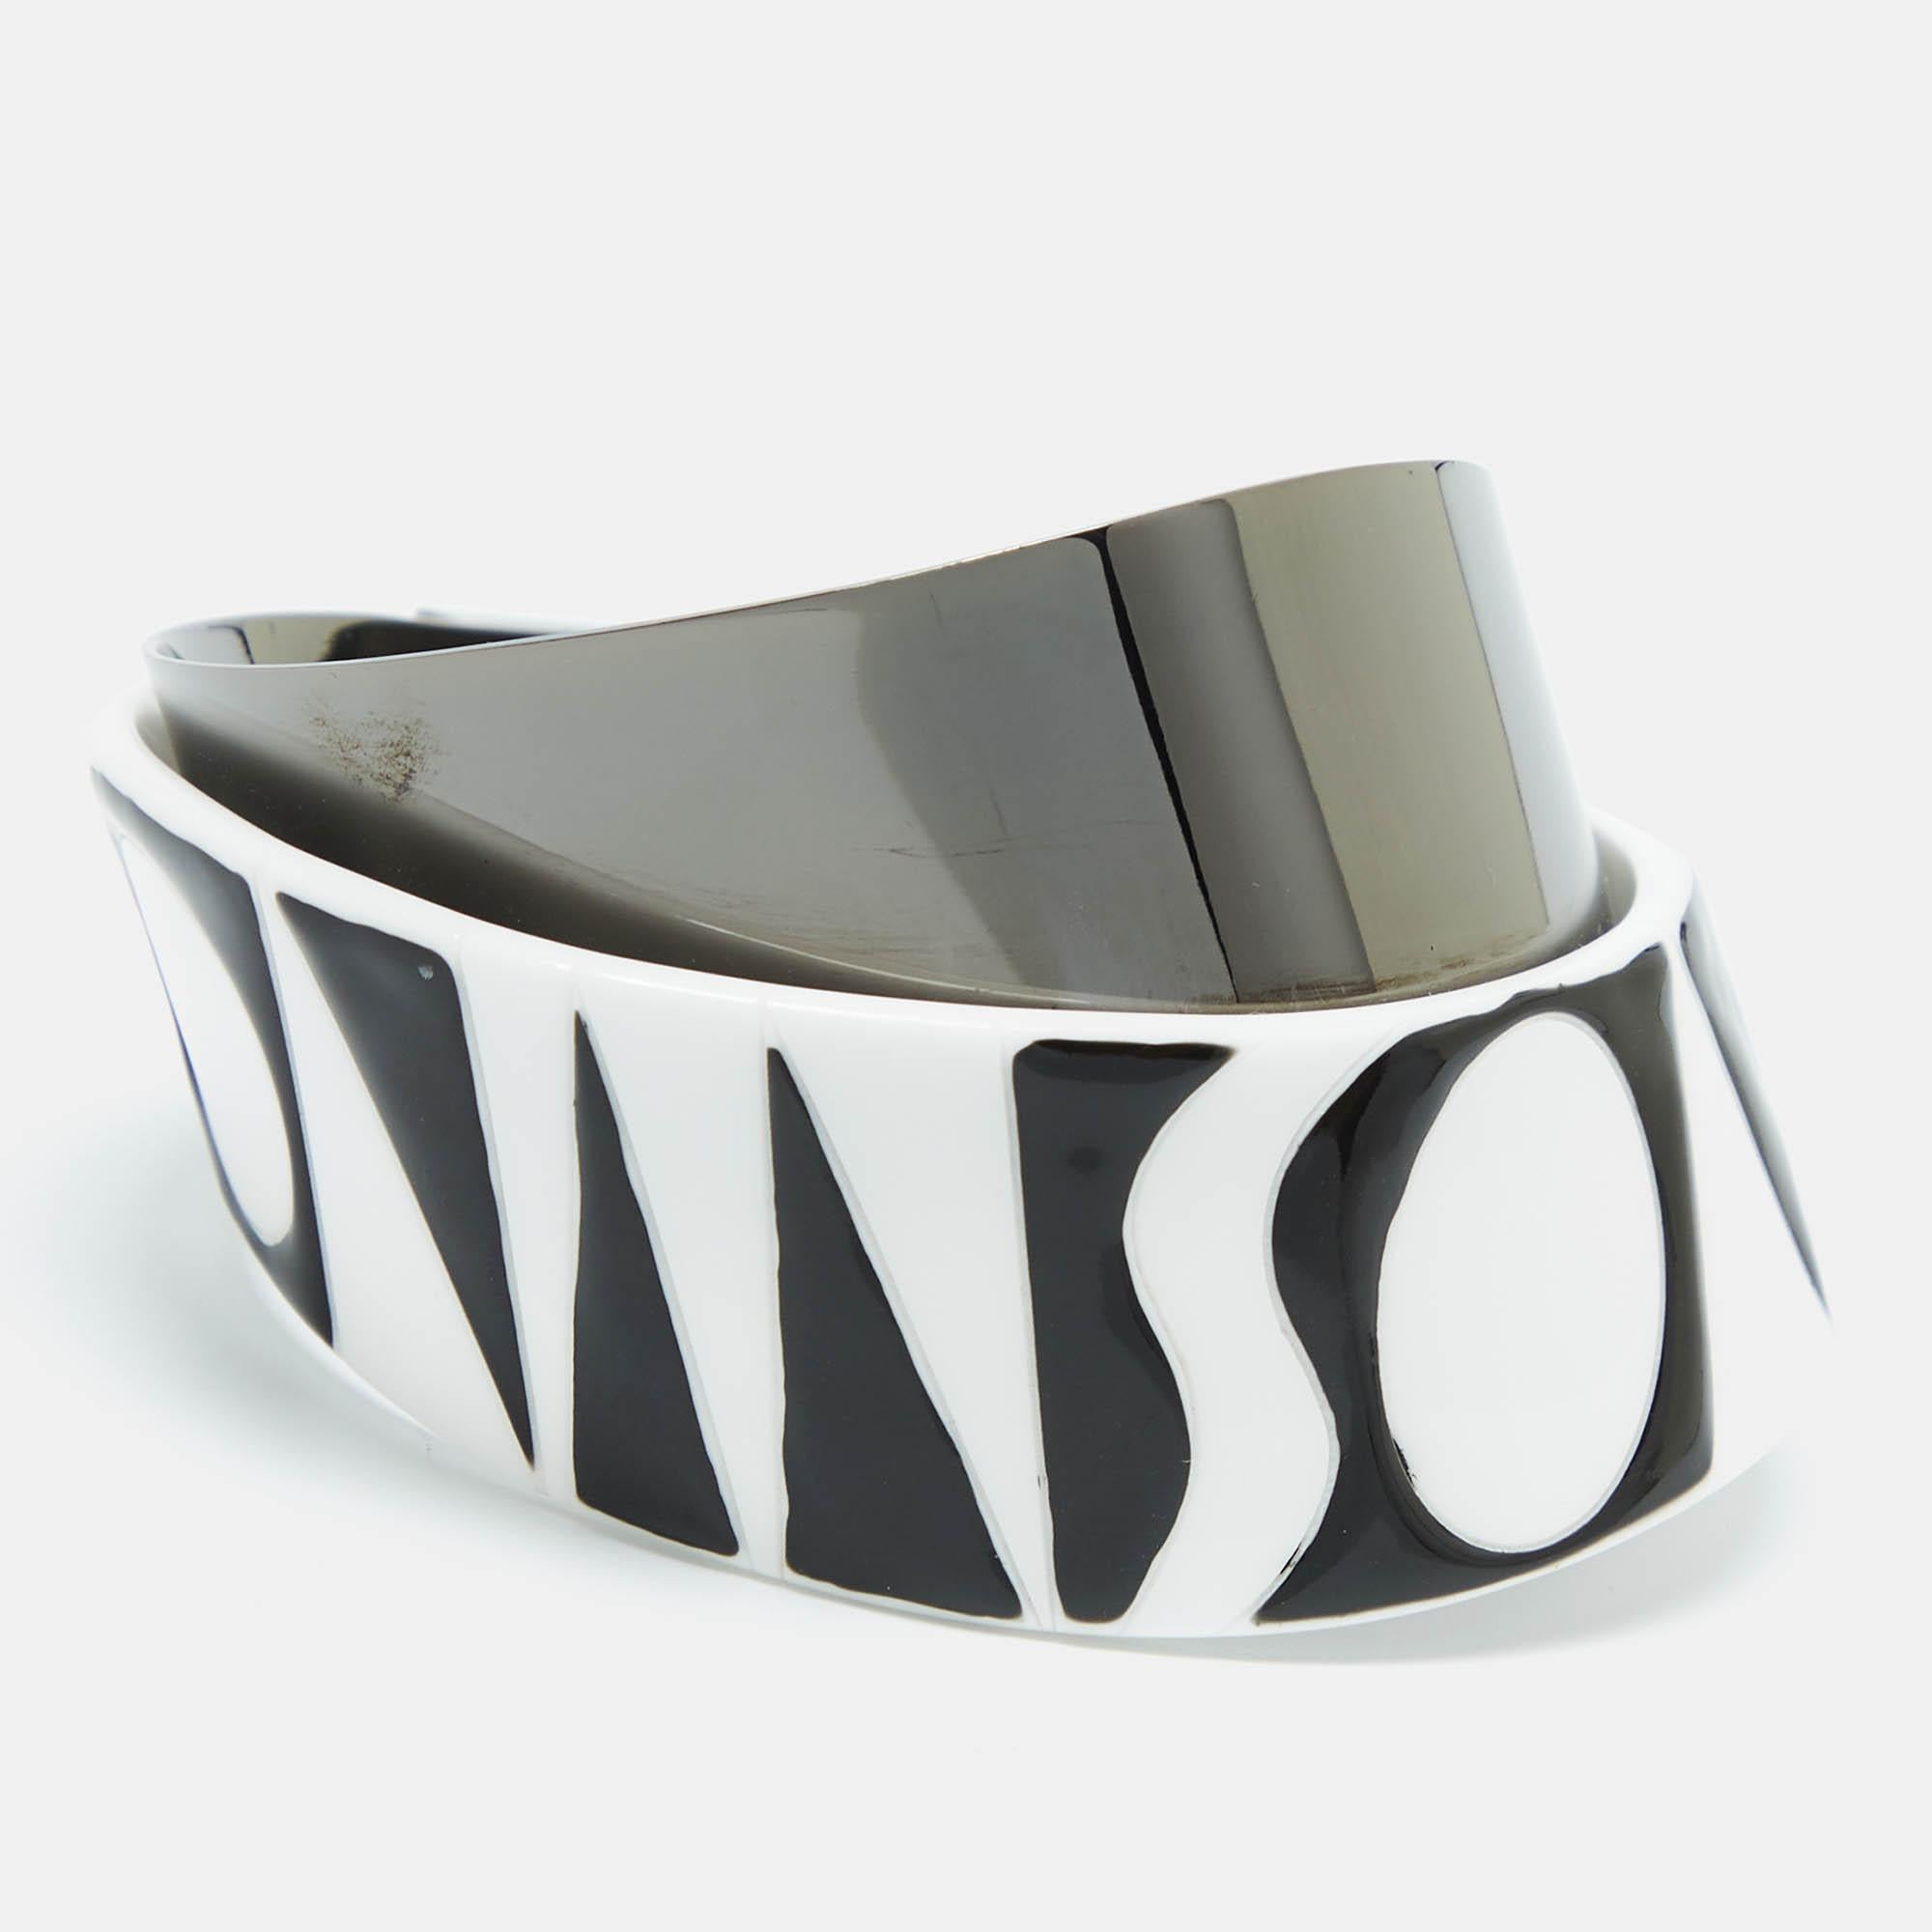 This cuff bracelet from Missoni, exuding a fun-spirited and bold appeal, will be your new favourite statement accessory. It has a monochrome body styled in a unique design with resin and gunmetal-tone metal. This one is comfortable to wear and will